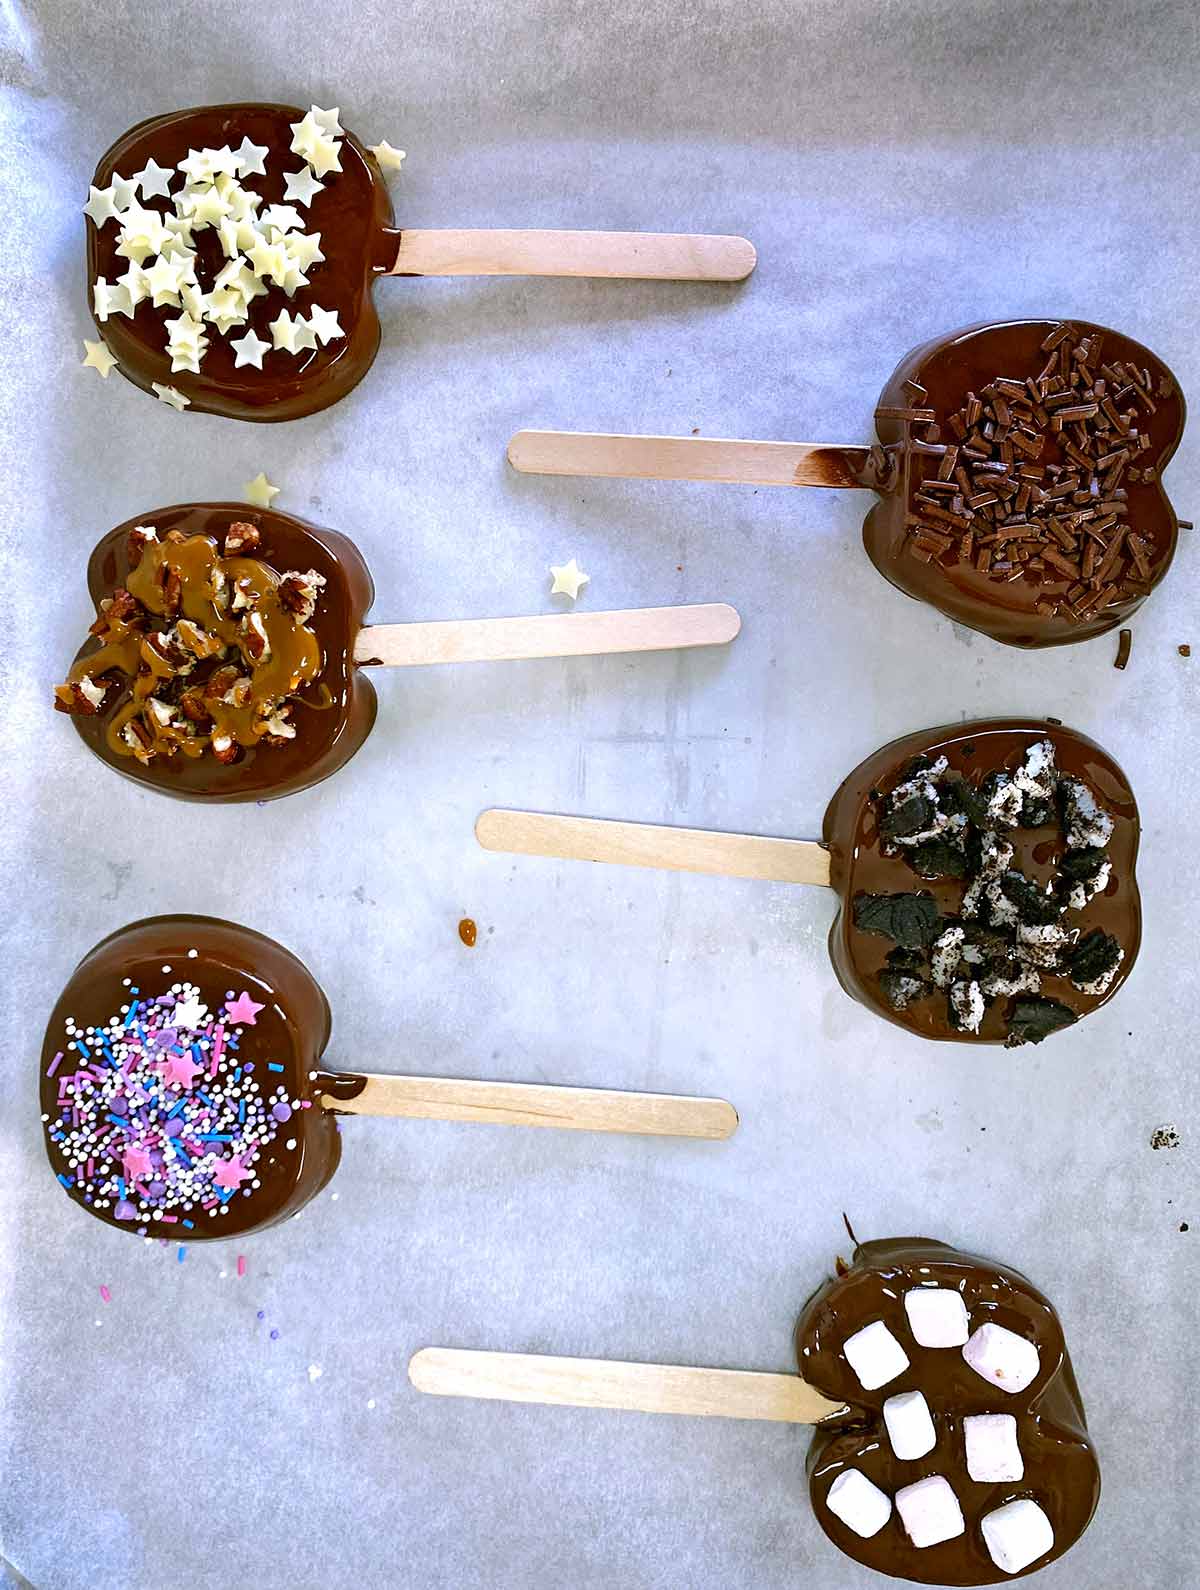 Six decorated chocolate covered apple slices.